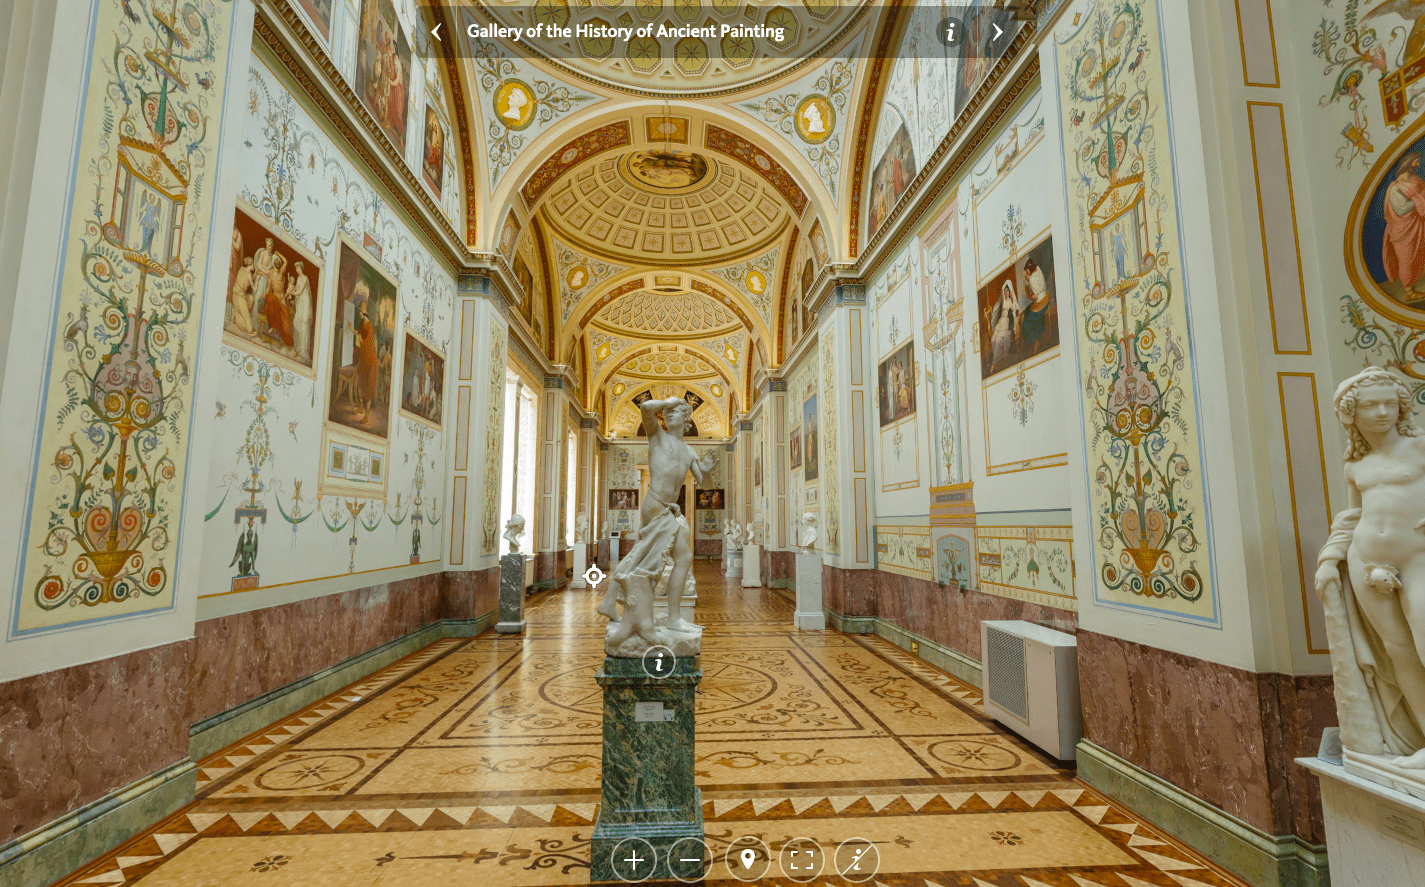 Hermitage Museum Virtual visit of the Gallery of the History of Ancient Painting